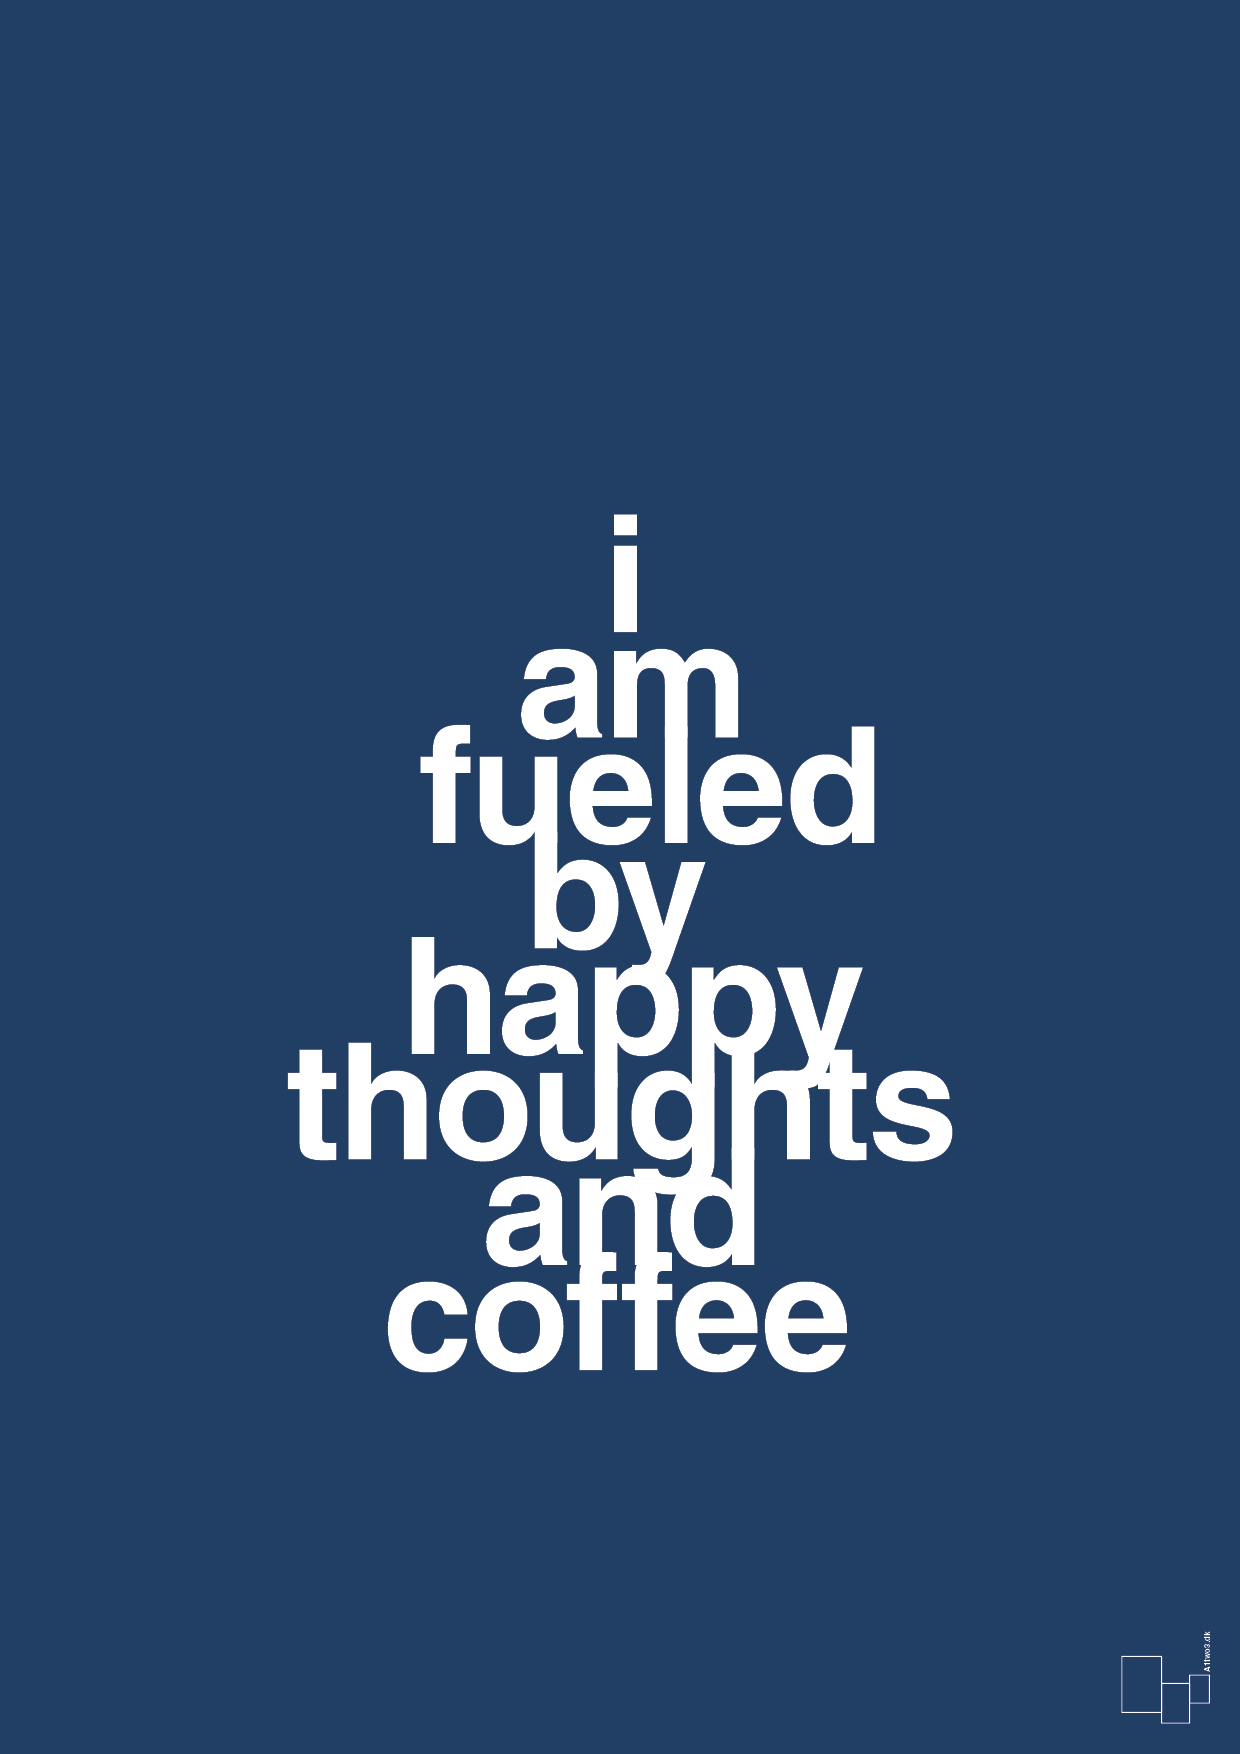 i am fueled by happy thoughts and coffee - Plakat med Mad & Drikke i Lapis Blue